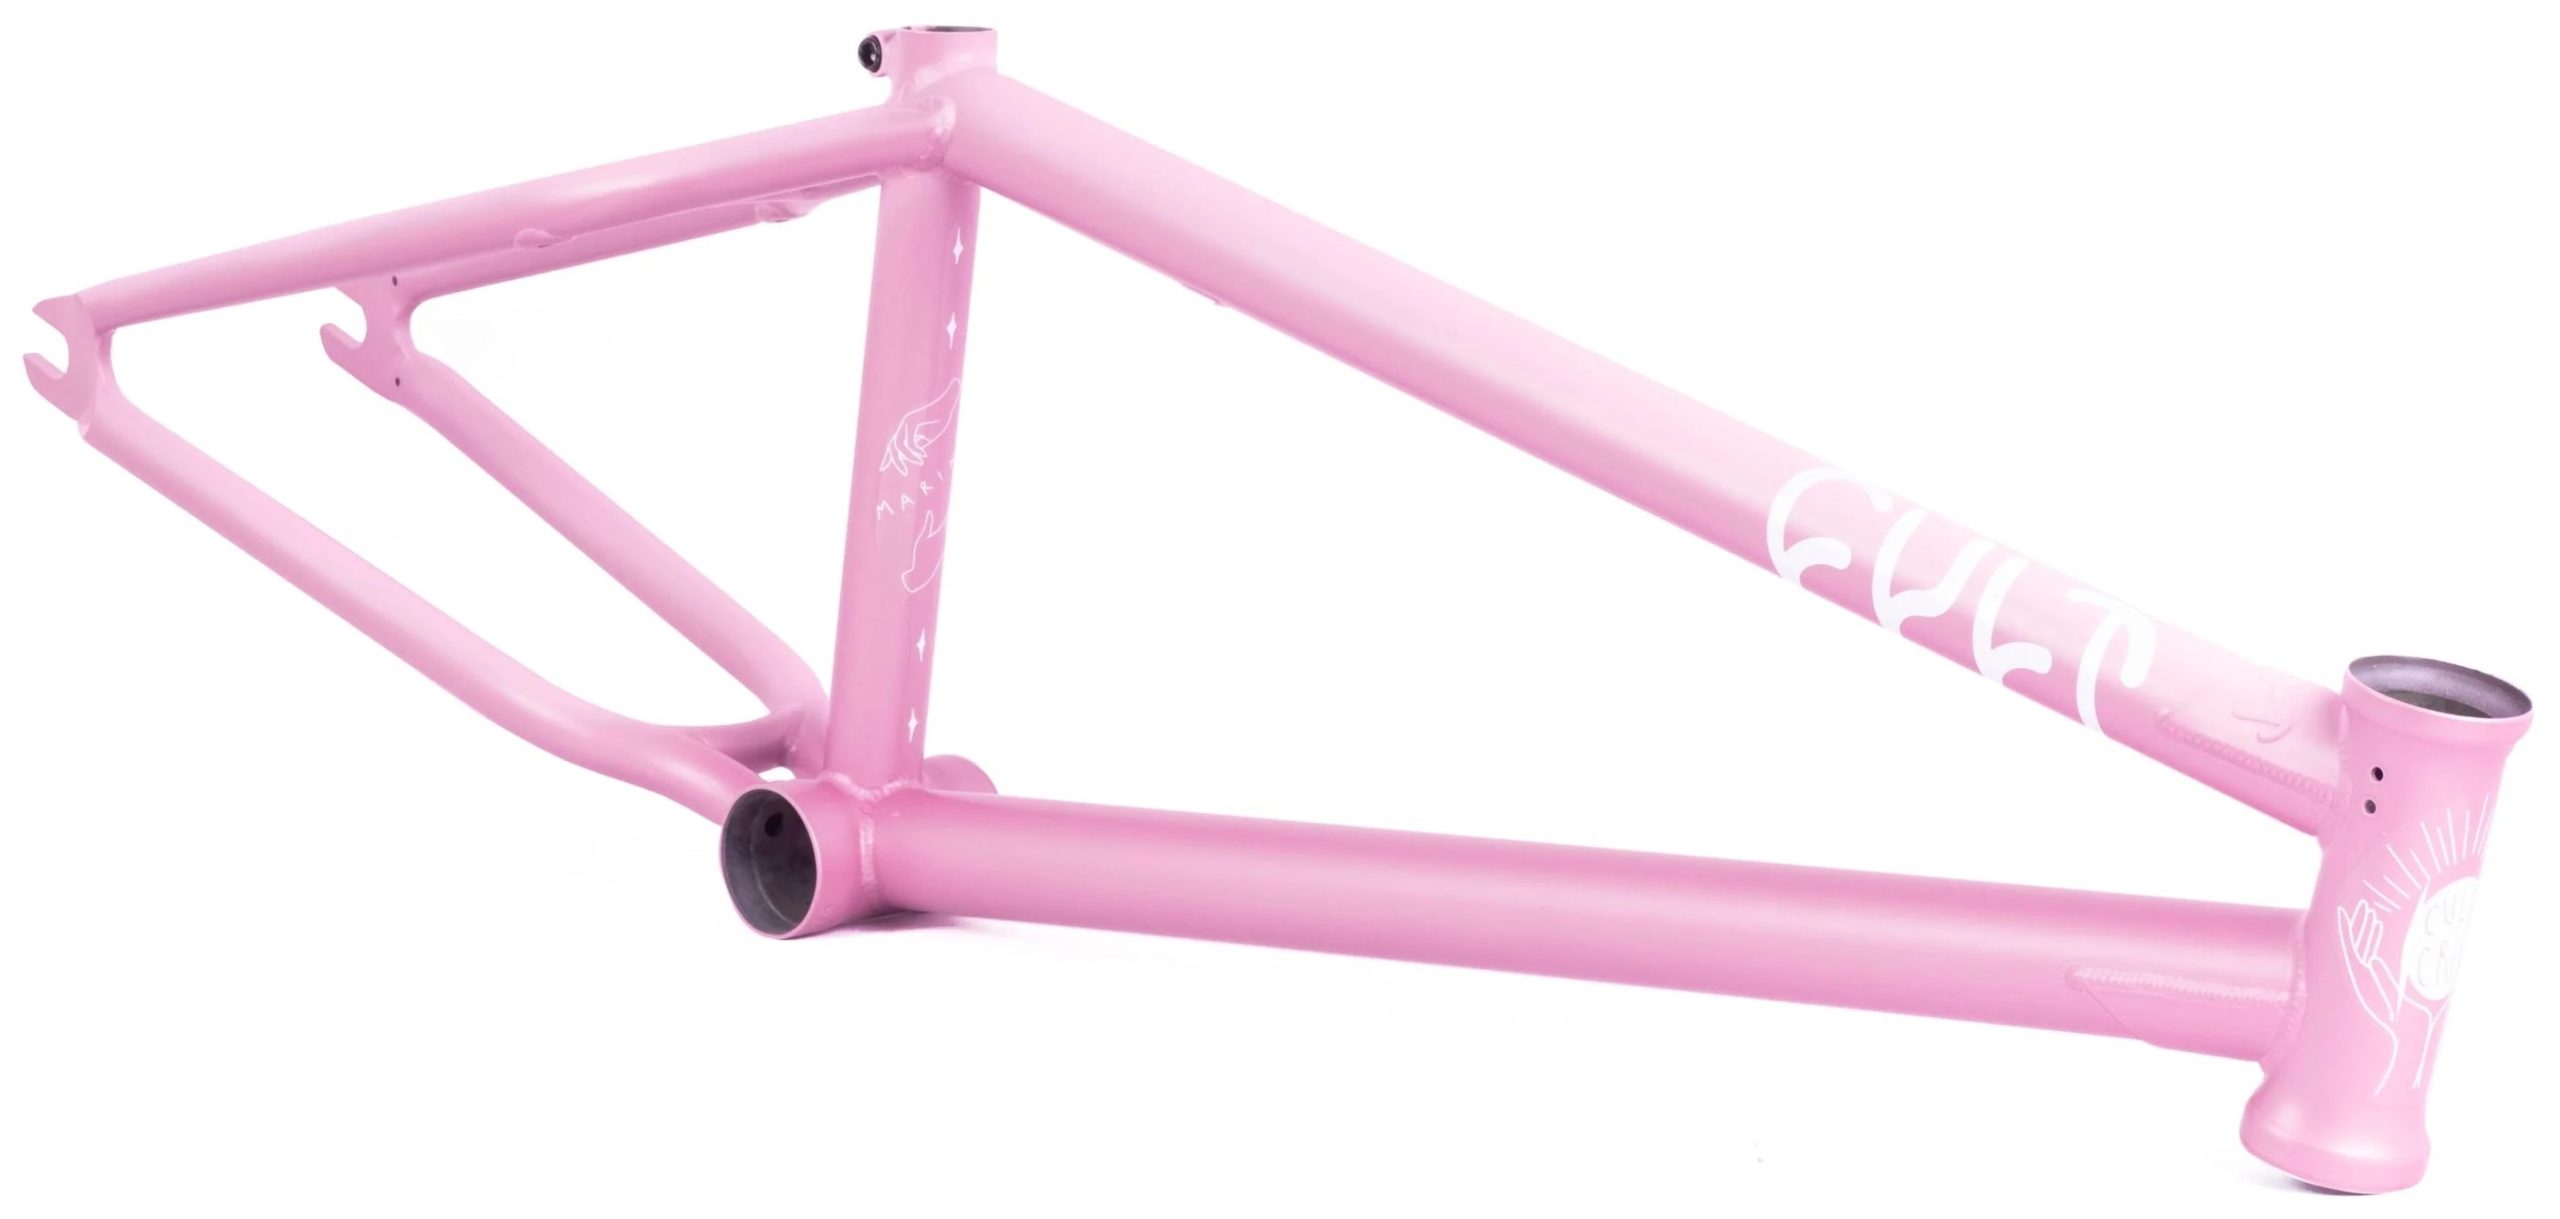 Cult CREW Frame (Angie Marino Colorway)